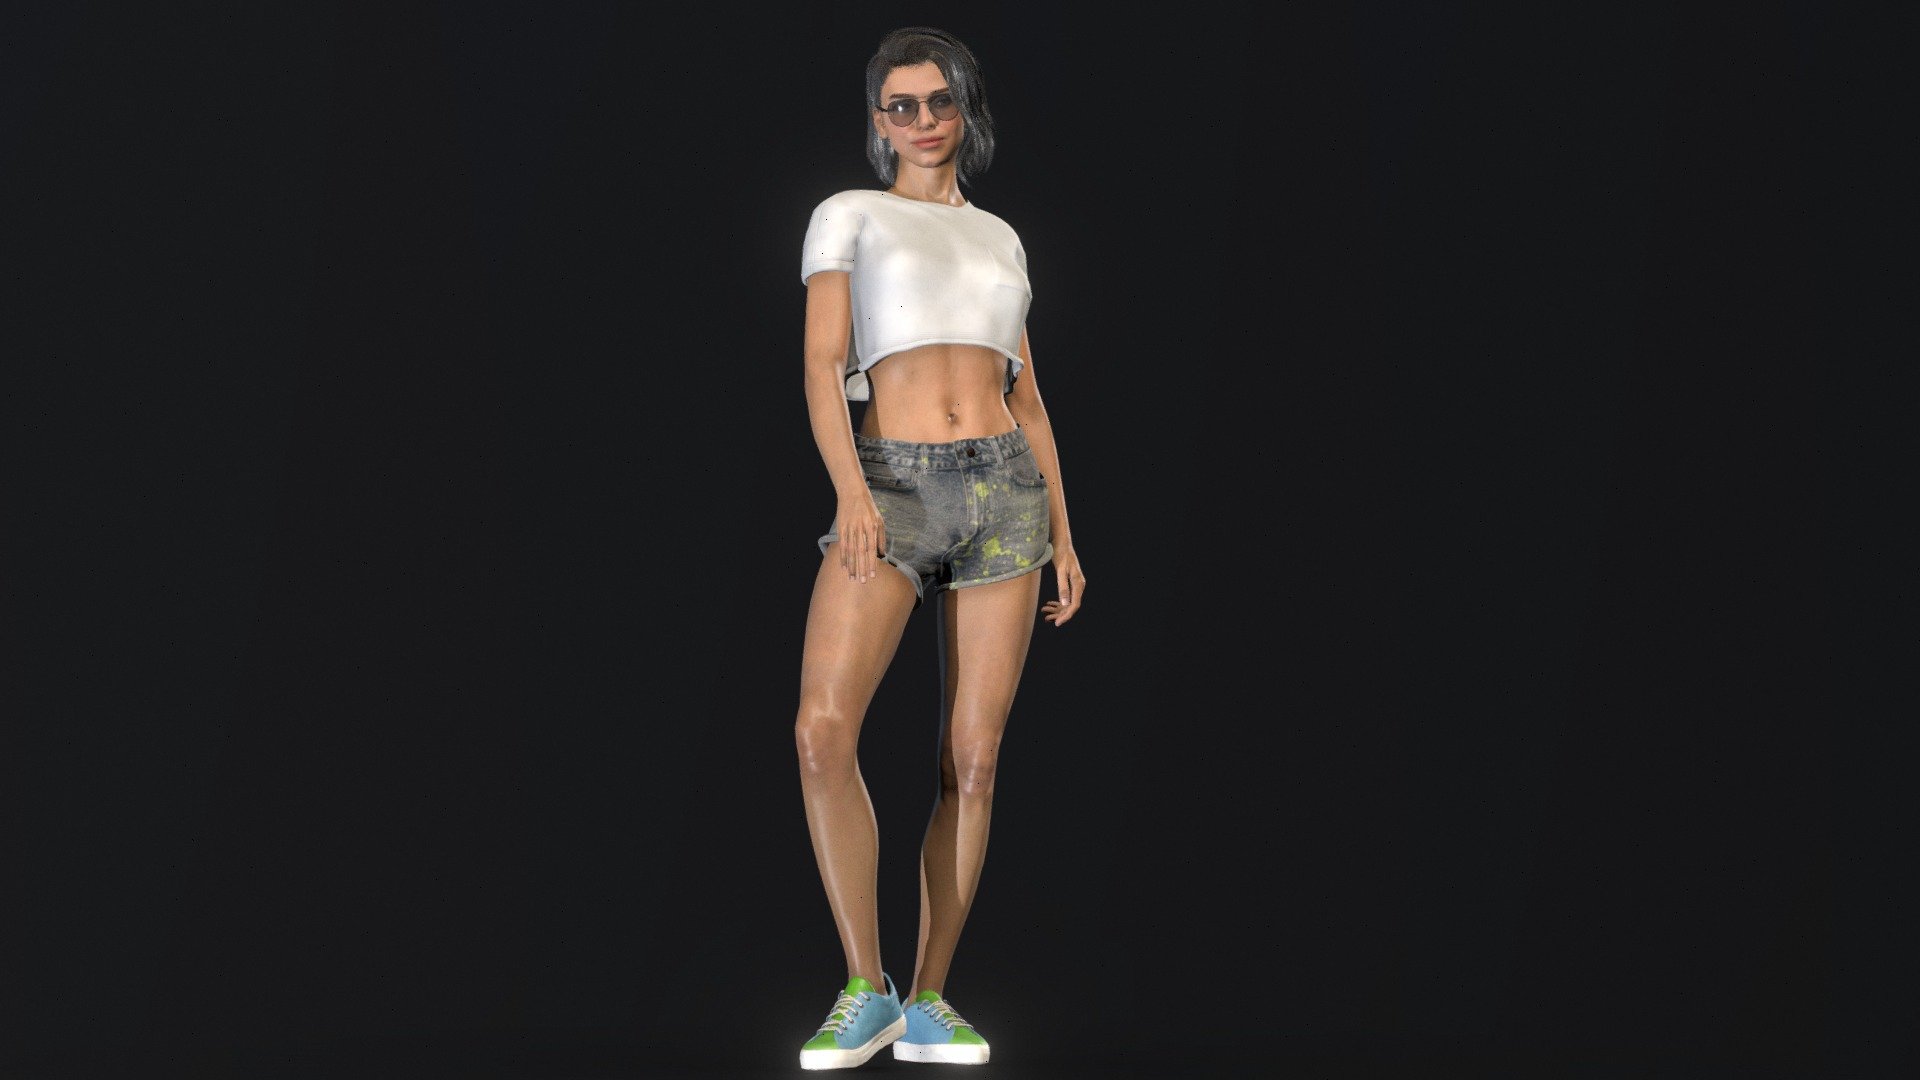 Female Low-Poly rigged and textured character
UV's: Head, Body, Arms, Legs, Eyes, Hair, Leashes, Brows, Nails, Upper Teeth, Lower Teeth,  Tongue, Scalp, T-Shirt, Shorts, Shoes.
You can use it in any project 3d model